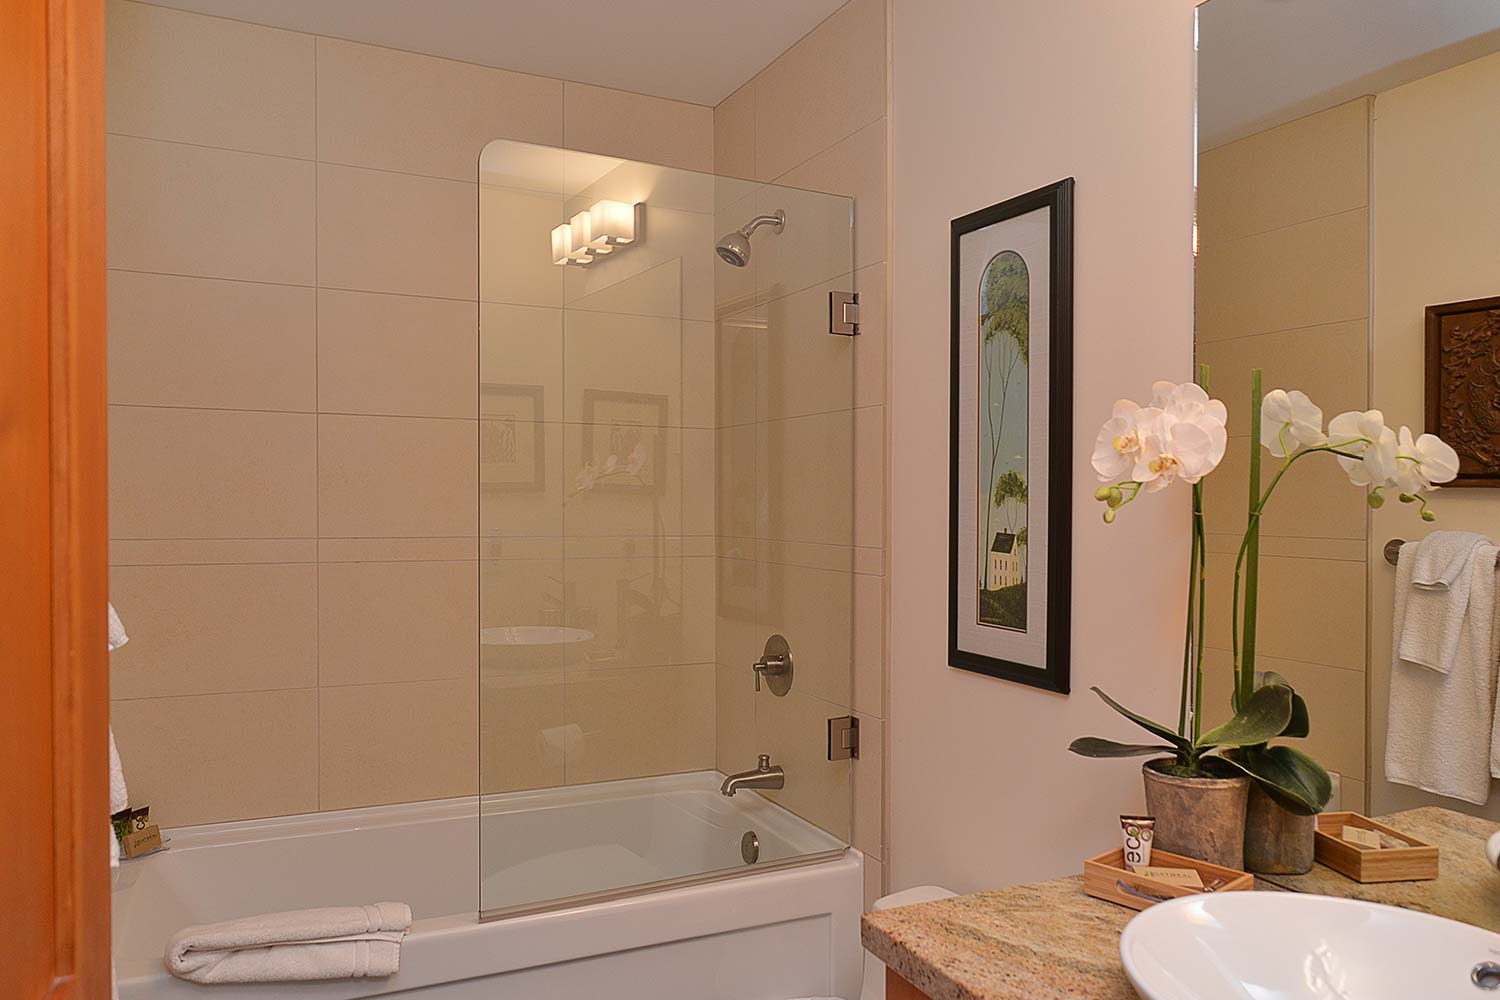 One of the bathrooms of this vacation house rental has a shower with a connected bathtub, artwork on the wall, and flowers.